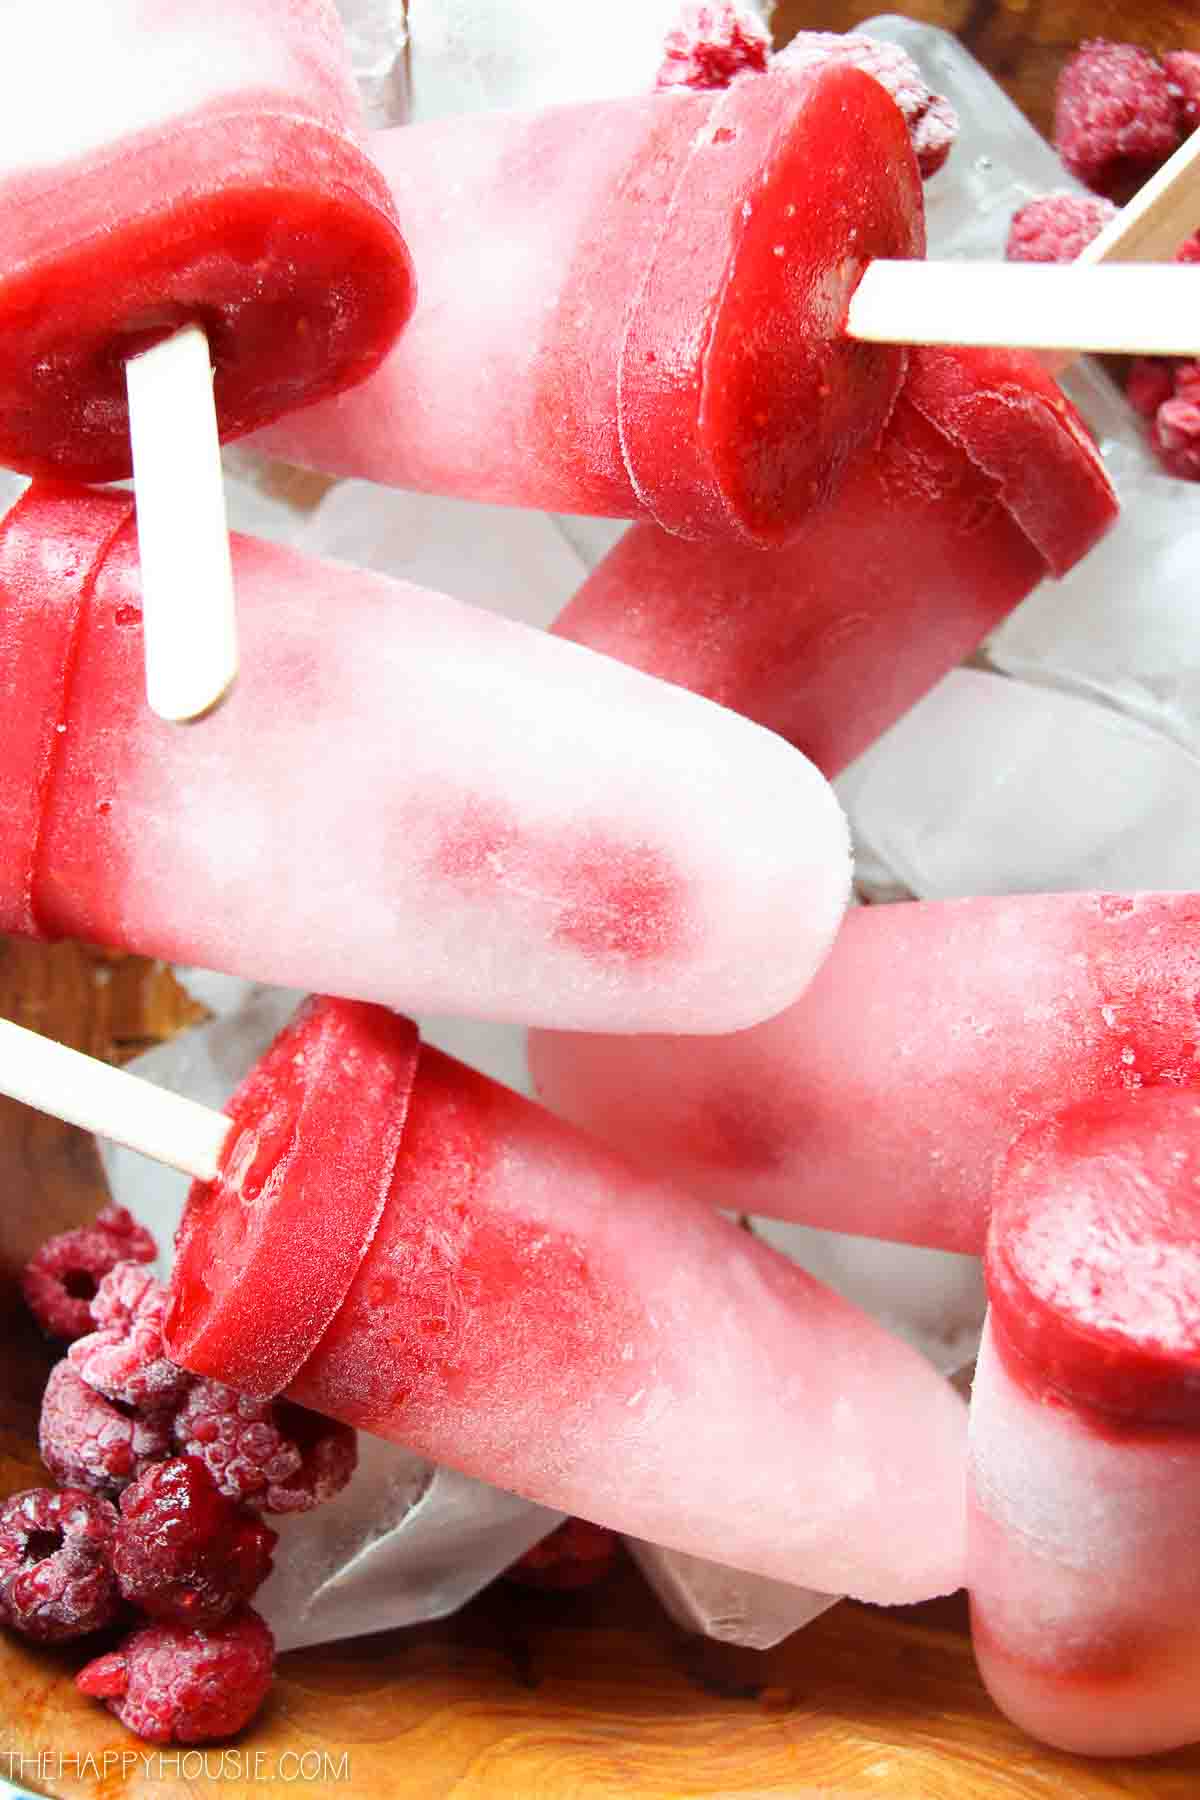 Up close picture of the cranberry color of the popsicles.